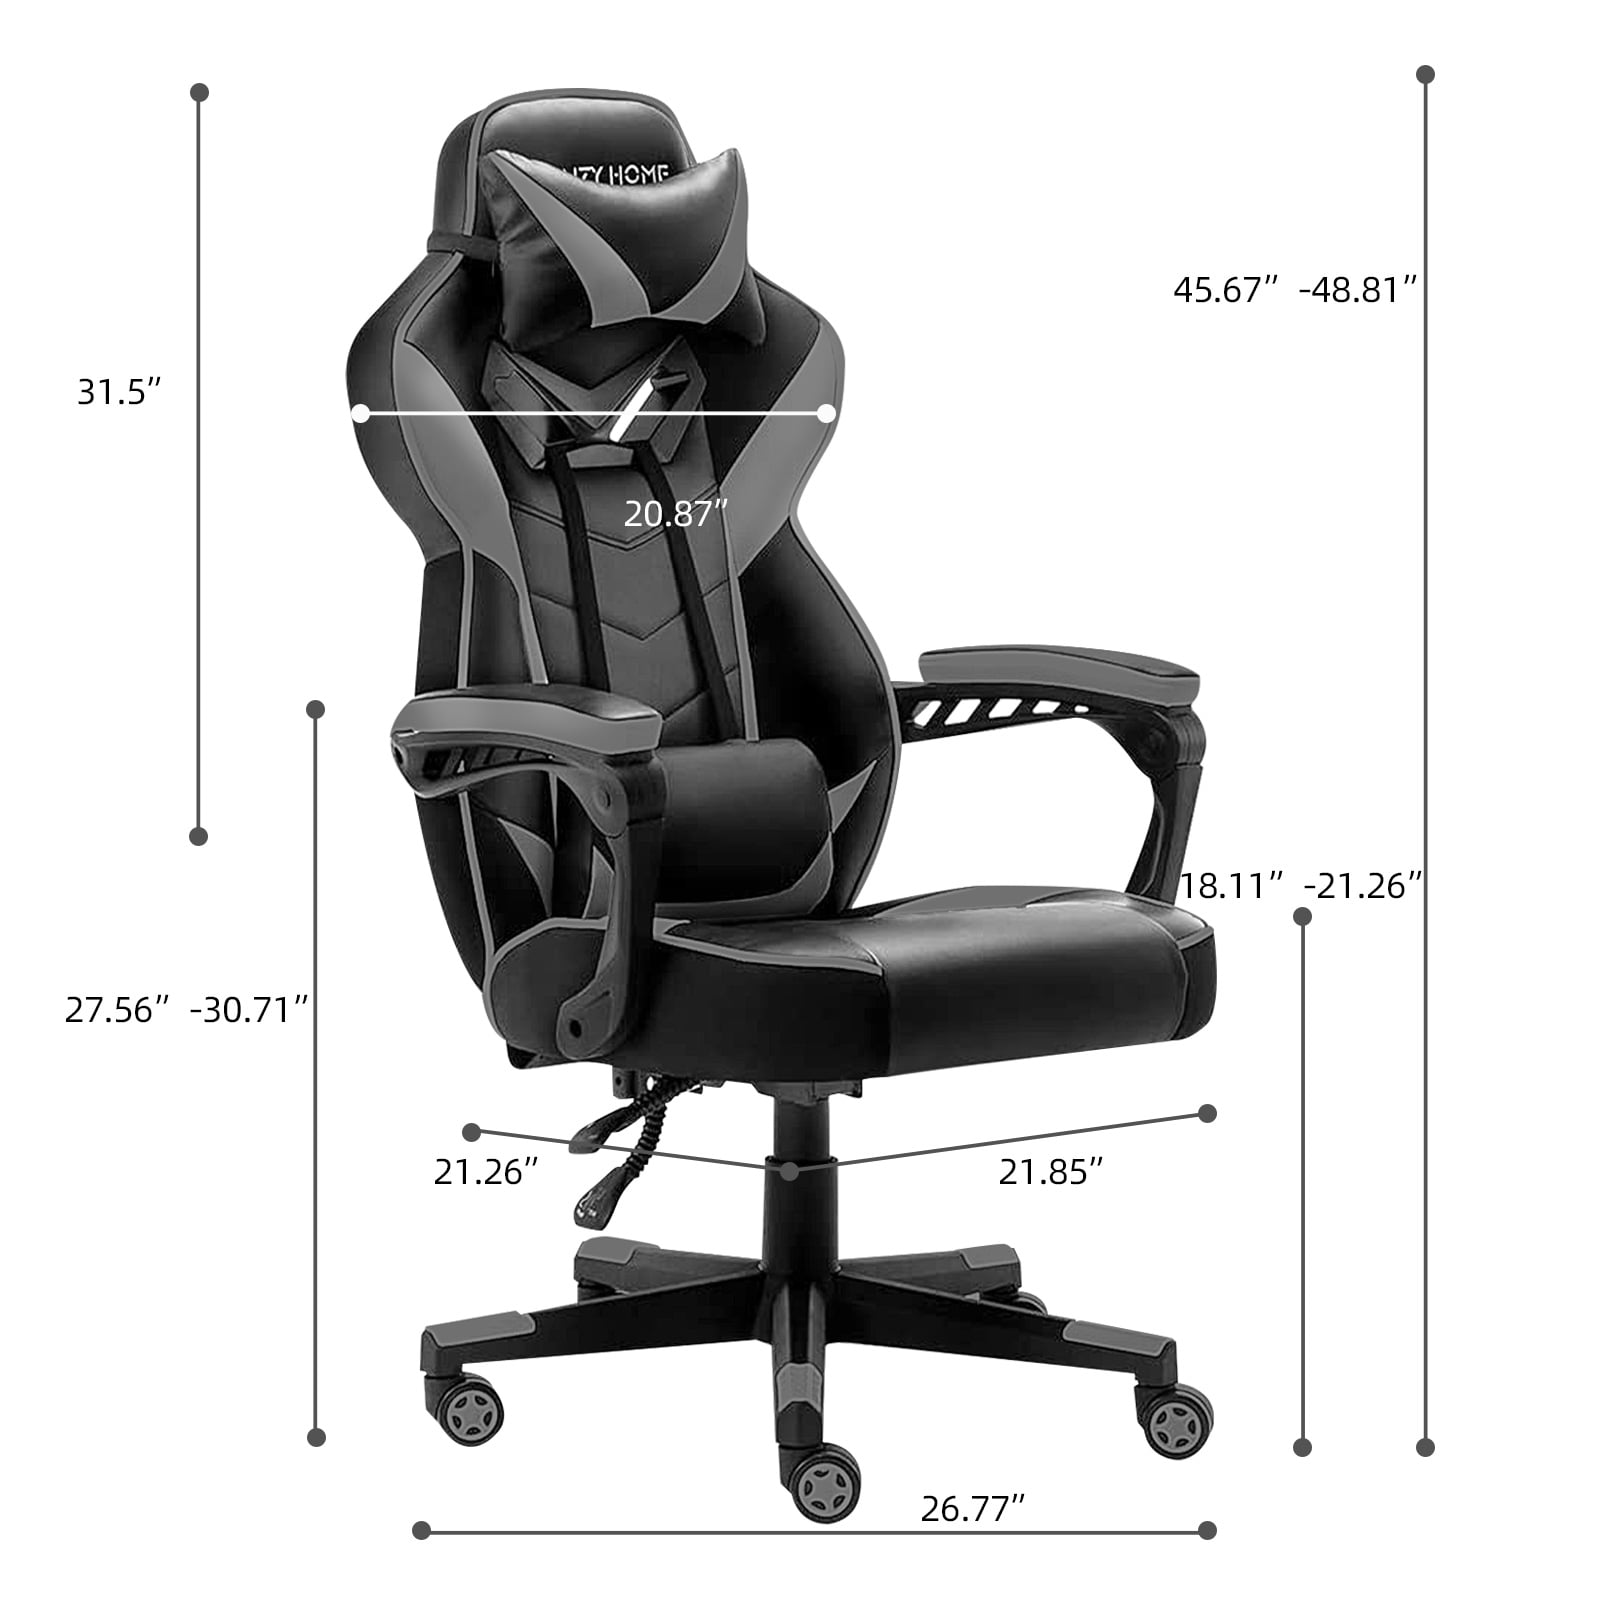 Details about   Executive Office Chair Computer Racing Gaming Chair Swivel PU Leather Desk Seat 